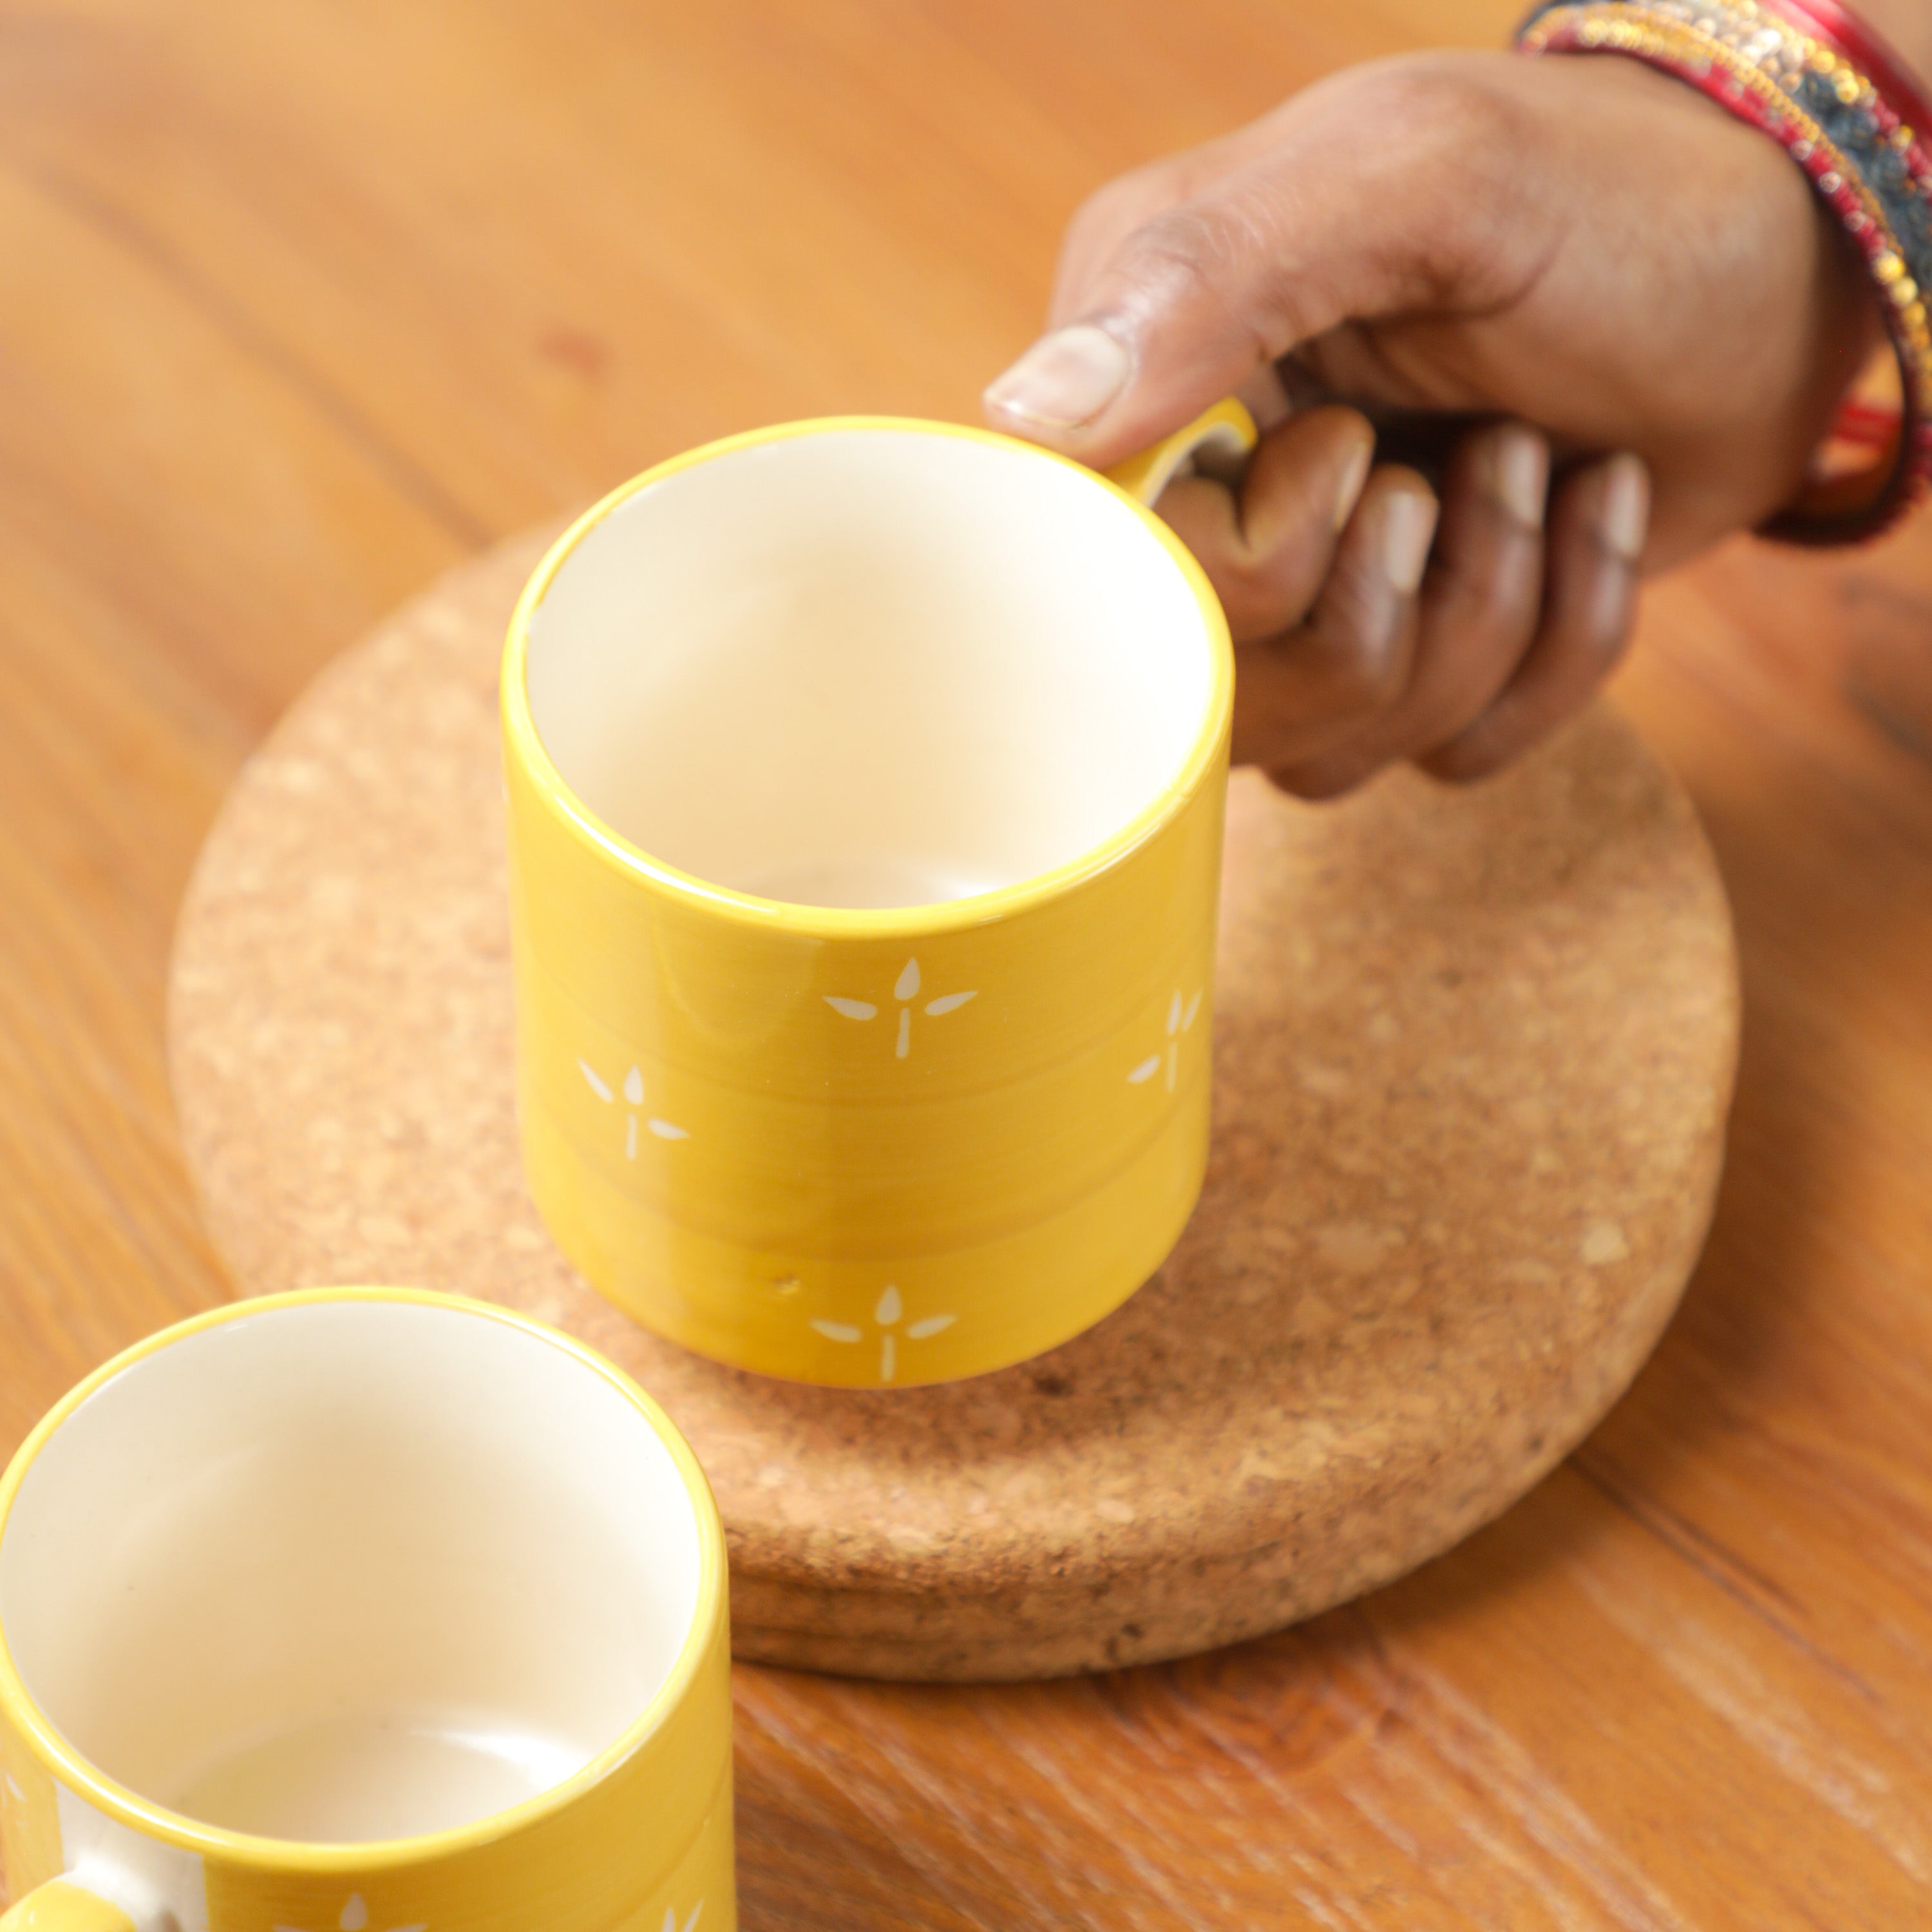 teacups in yellow color